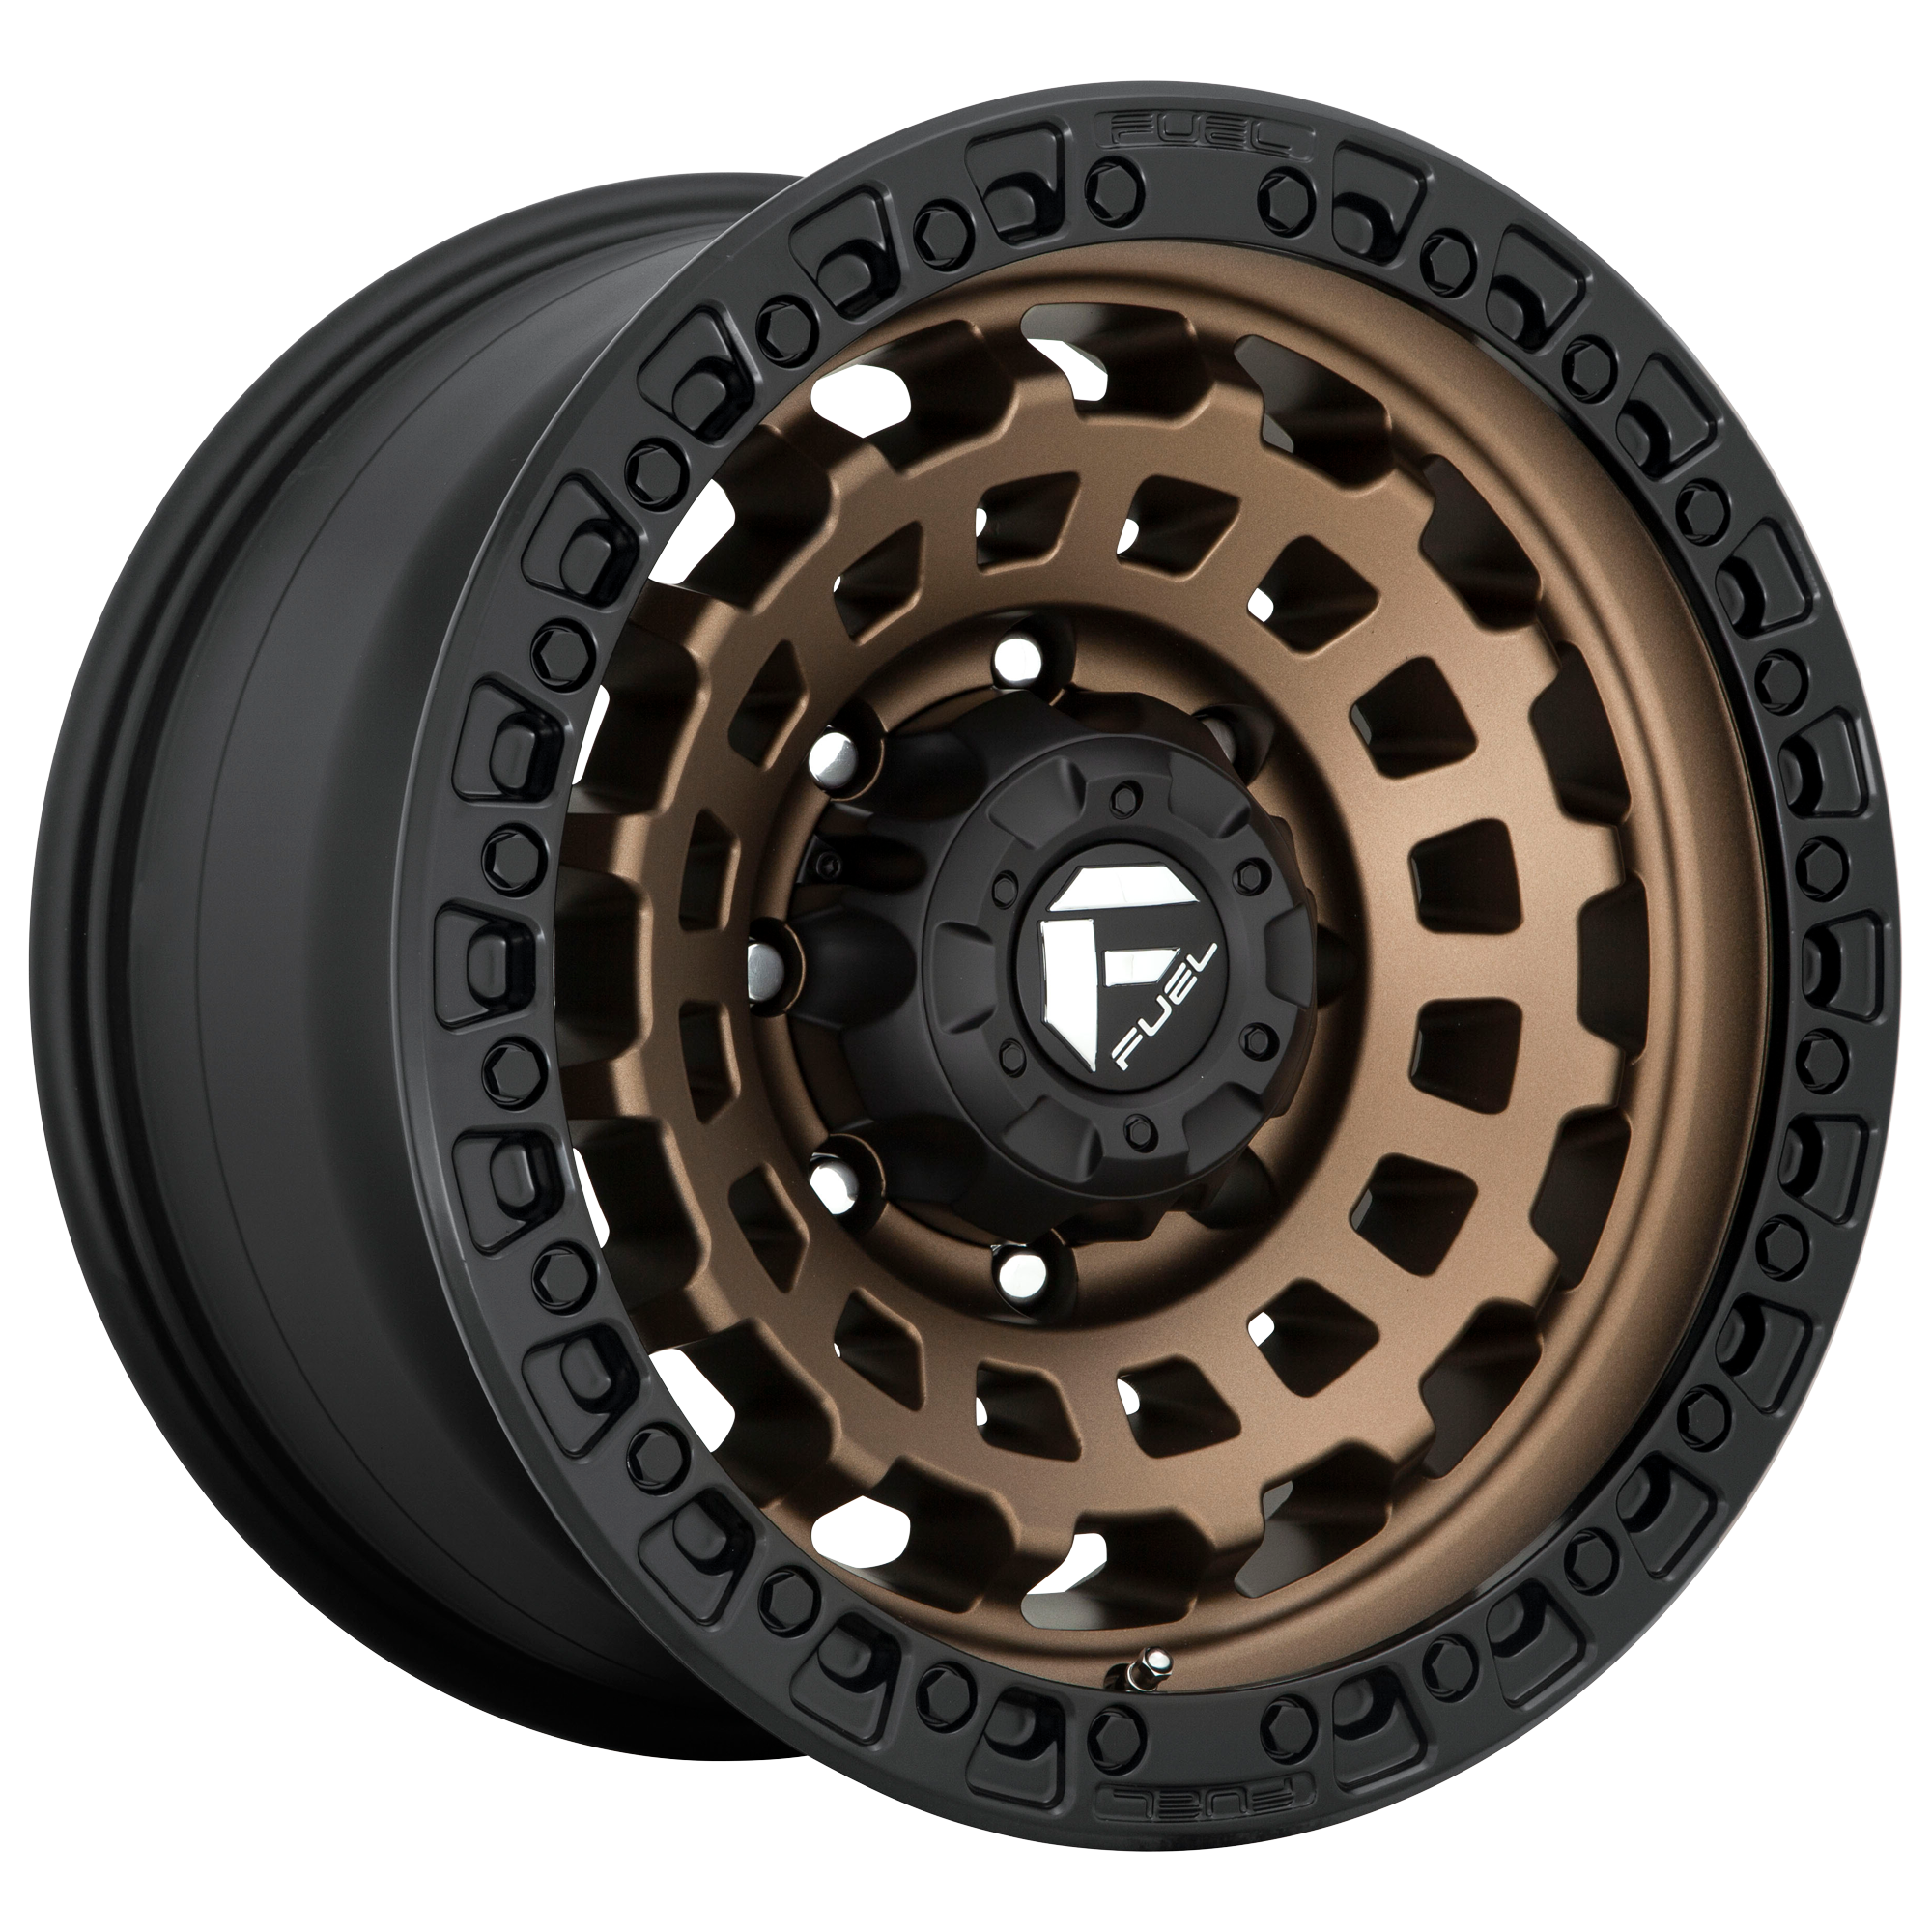 ZEPHYR 20x9 8x165.10 MATTE BRONZE BLACK BEAD RING (1 mm) - Tires and Engine Performance